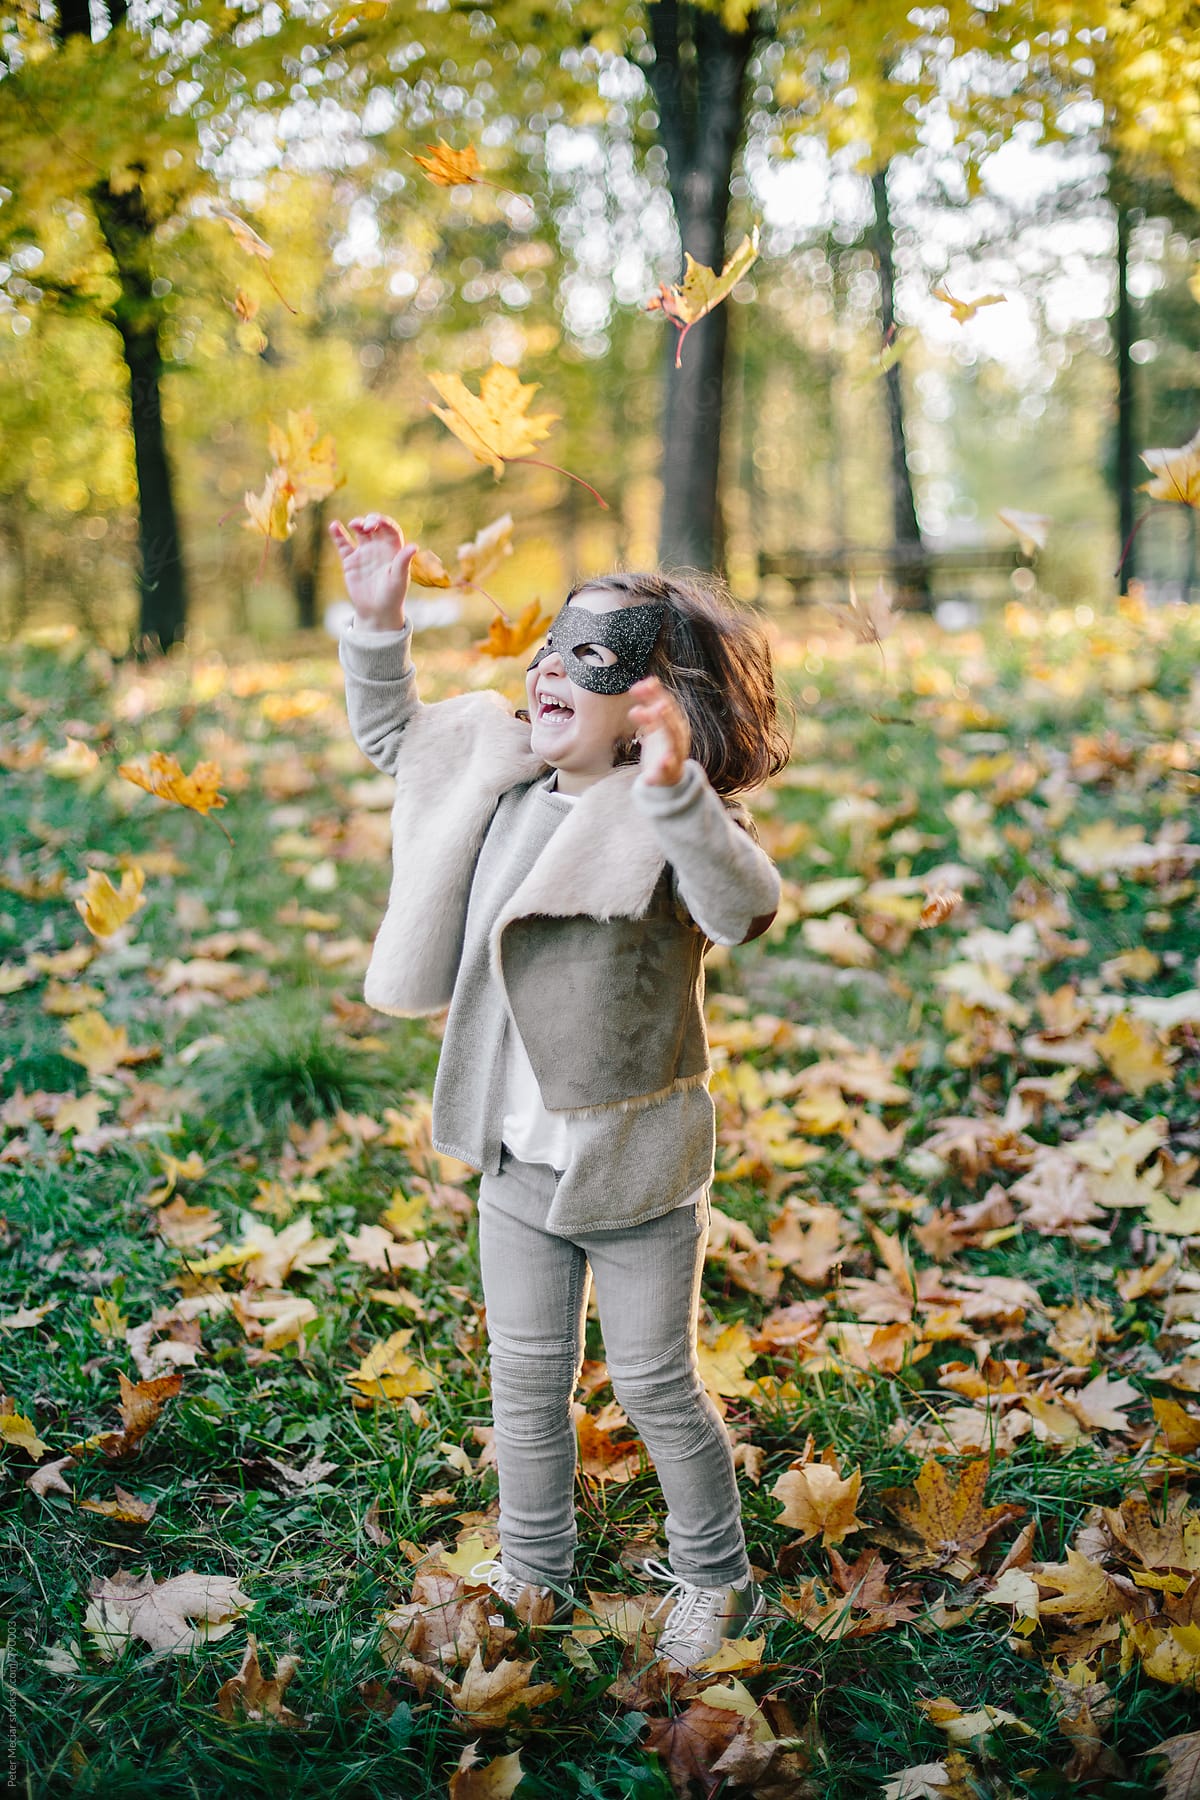 Little girl with a face mask is playing in autumn park and throw autumn leaves